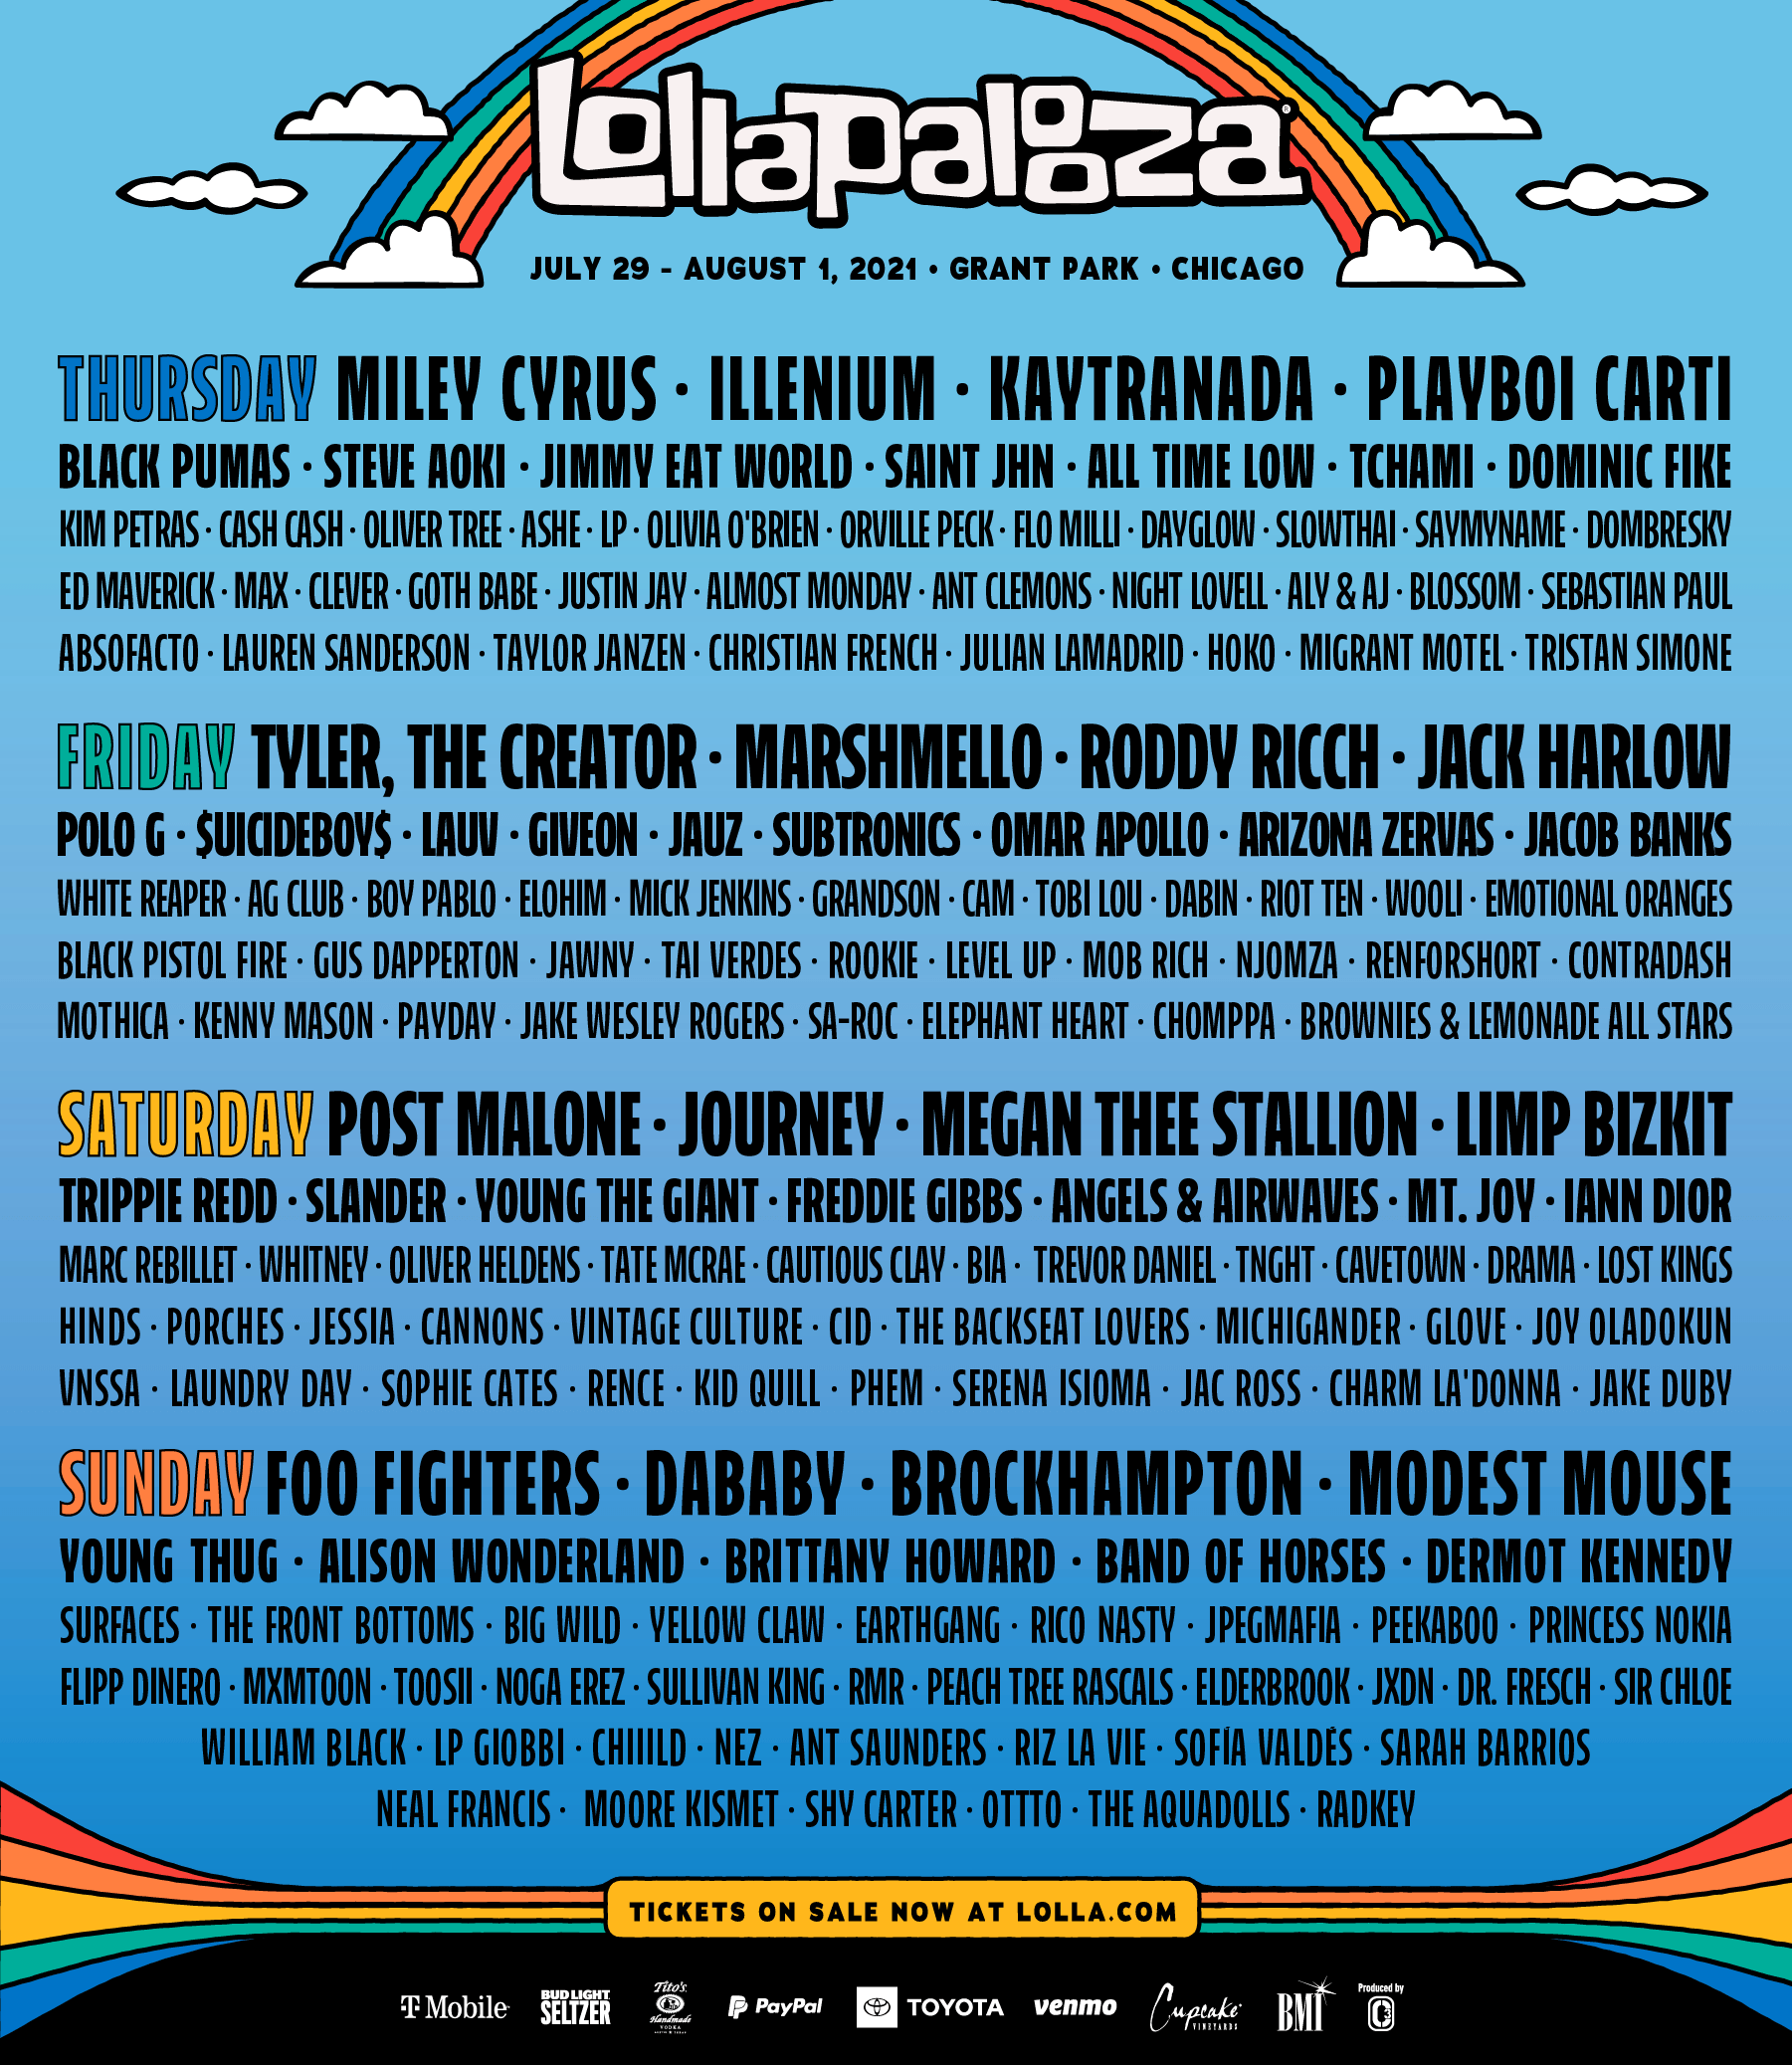 Lollapalooza Announce 2021 Lineup By Day Plus 1-Day Tickets! 1